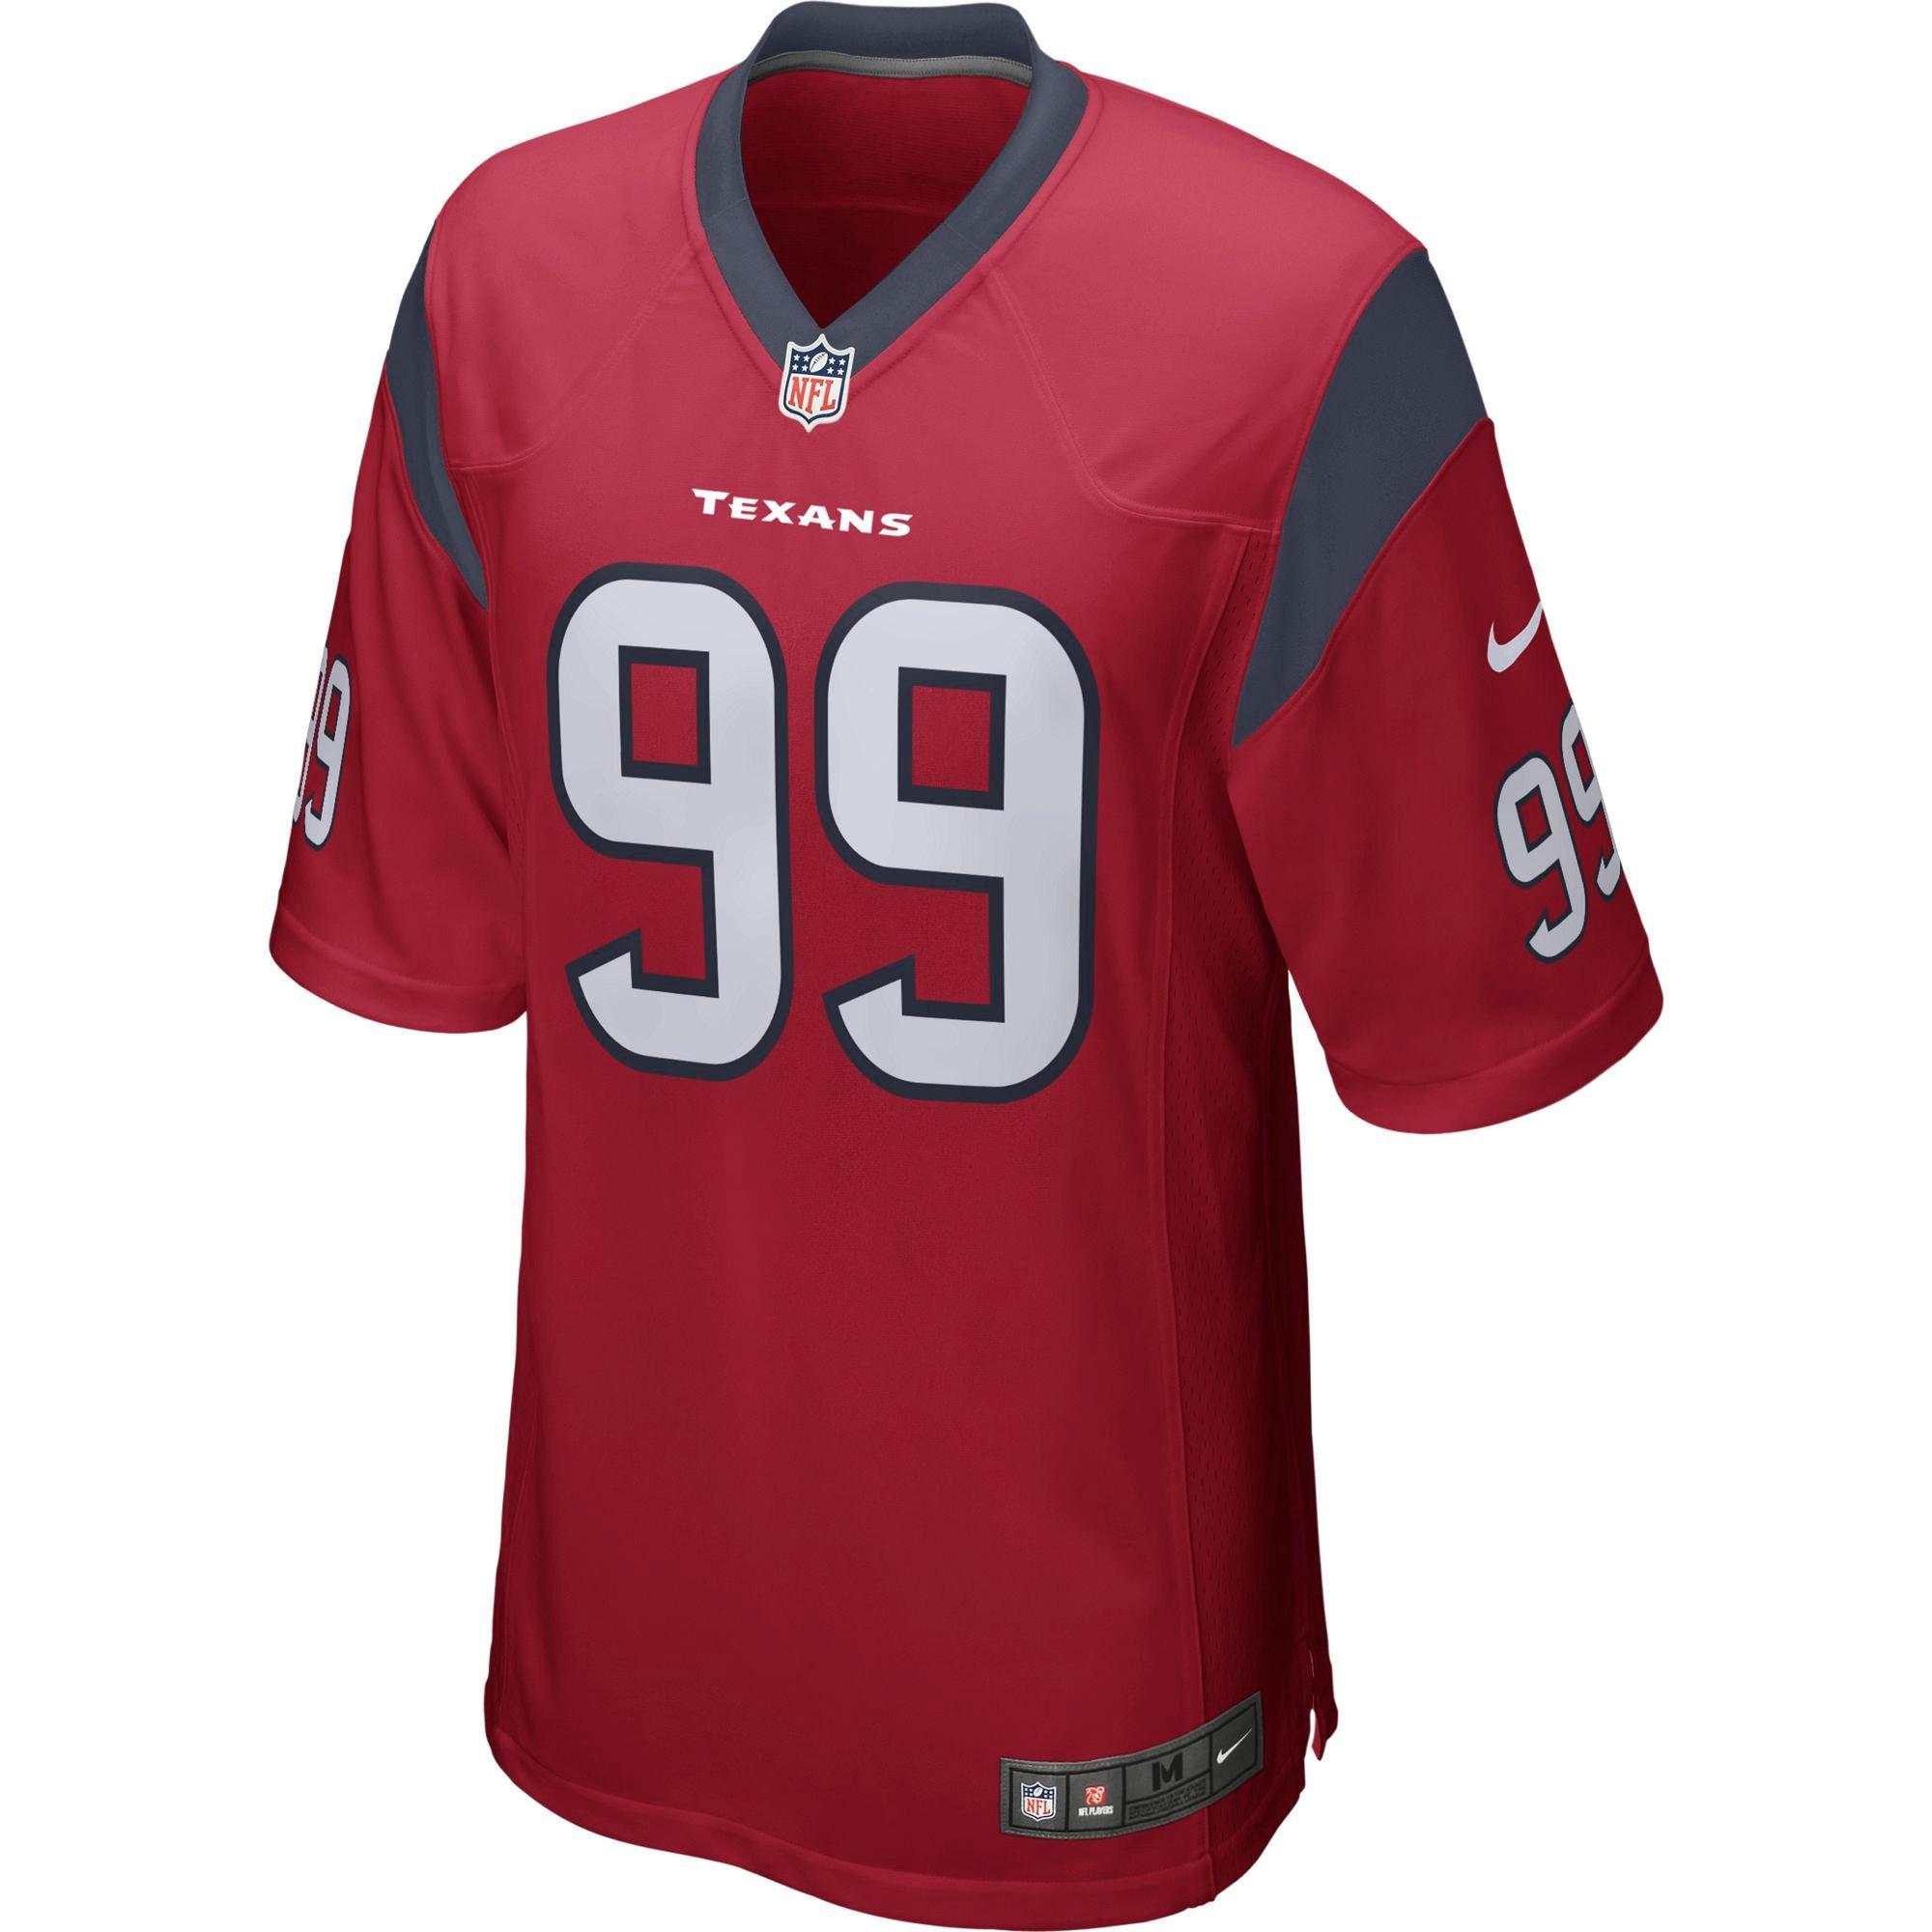 where to buy nfl jerseys in houston